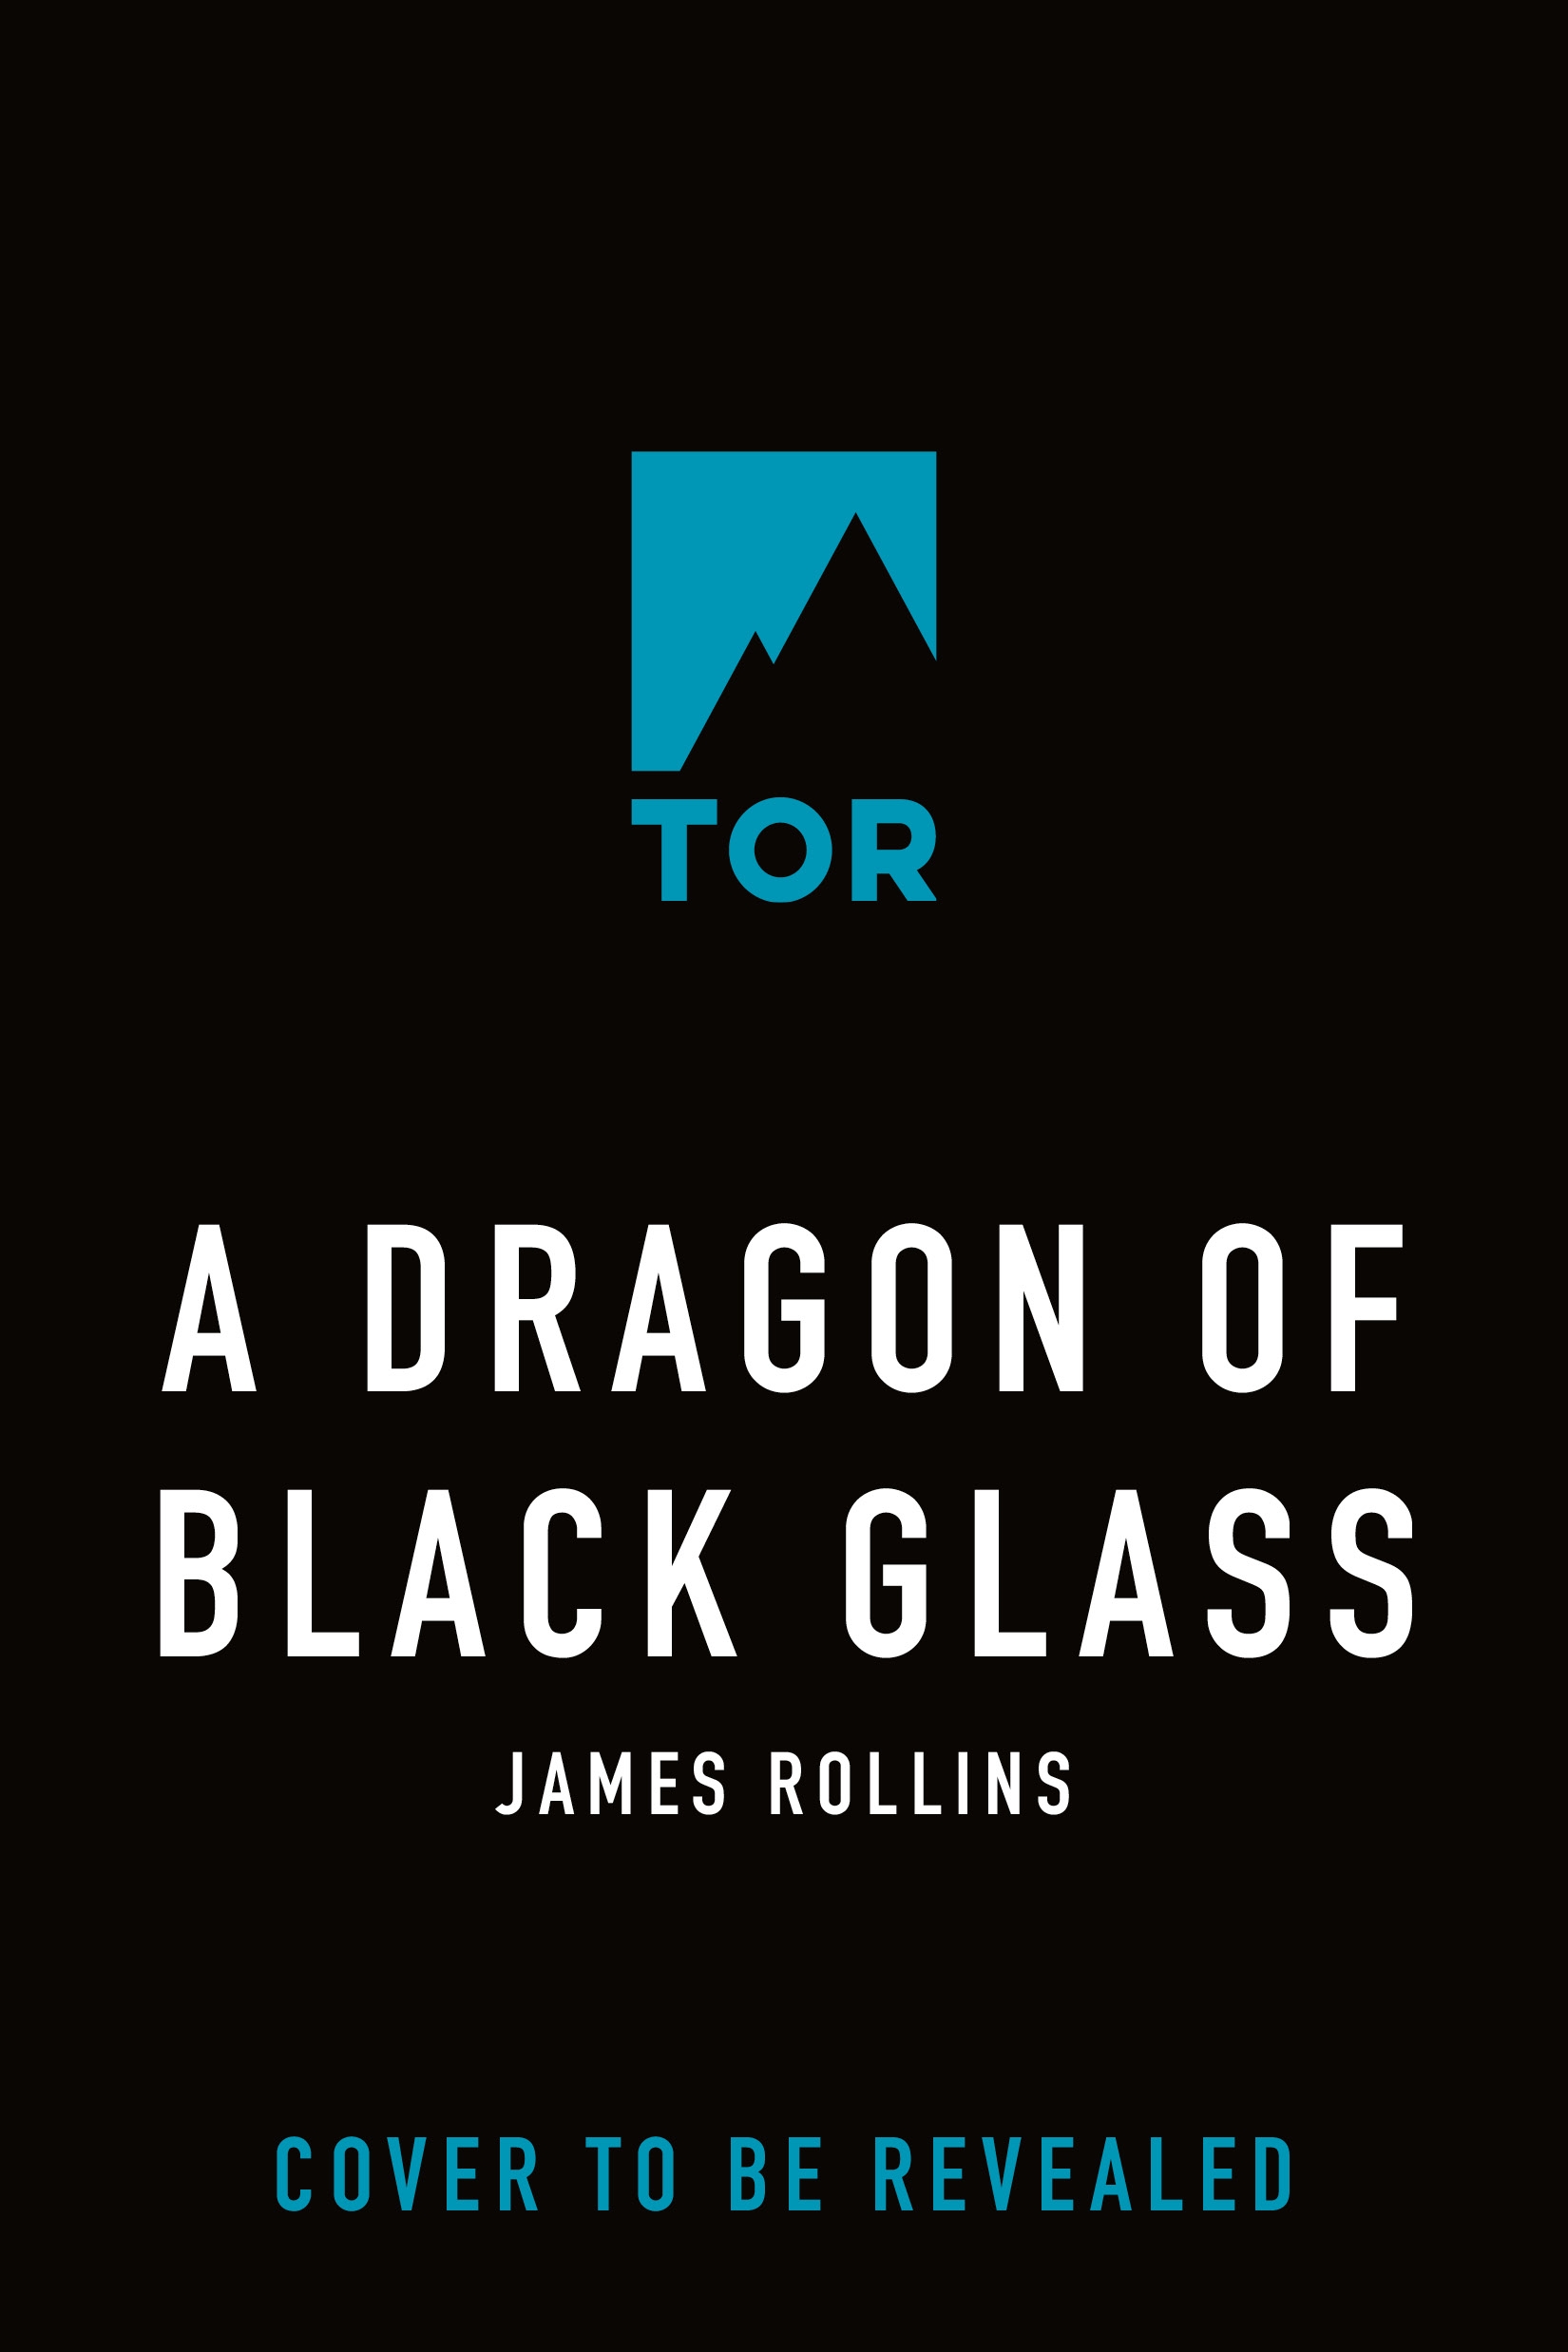 A Dragon of Black Glass by James Rollins